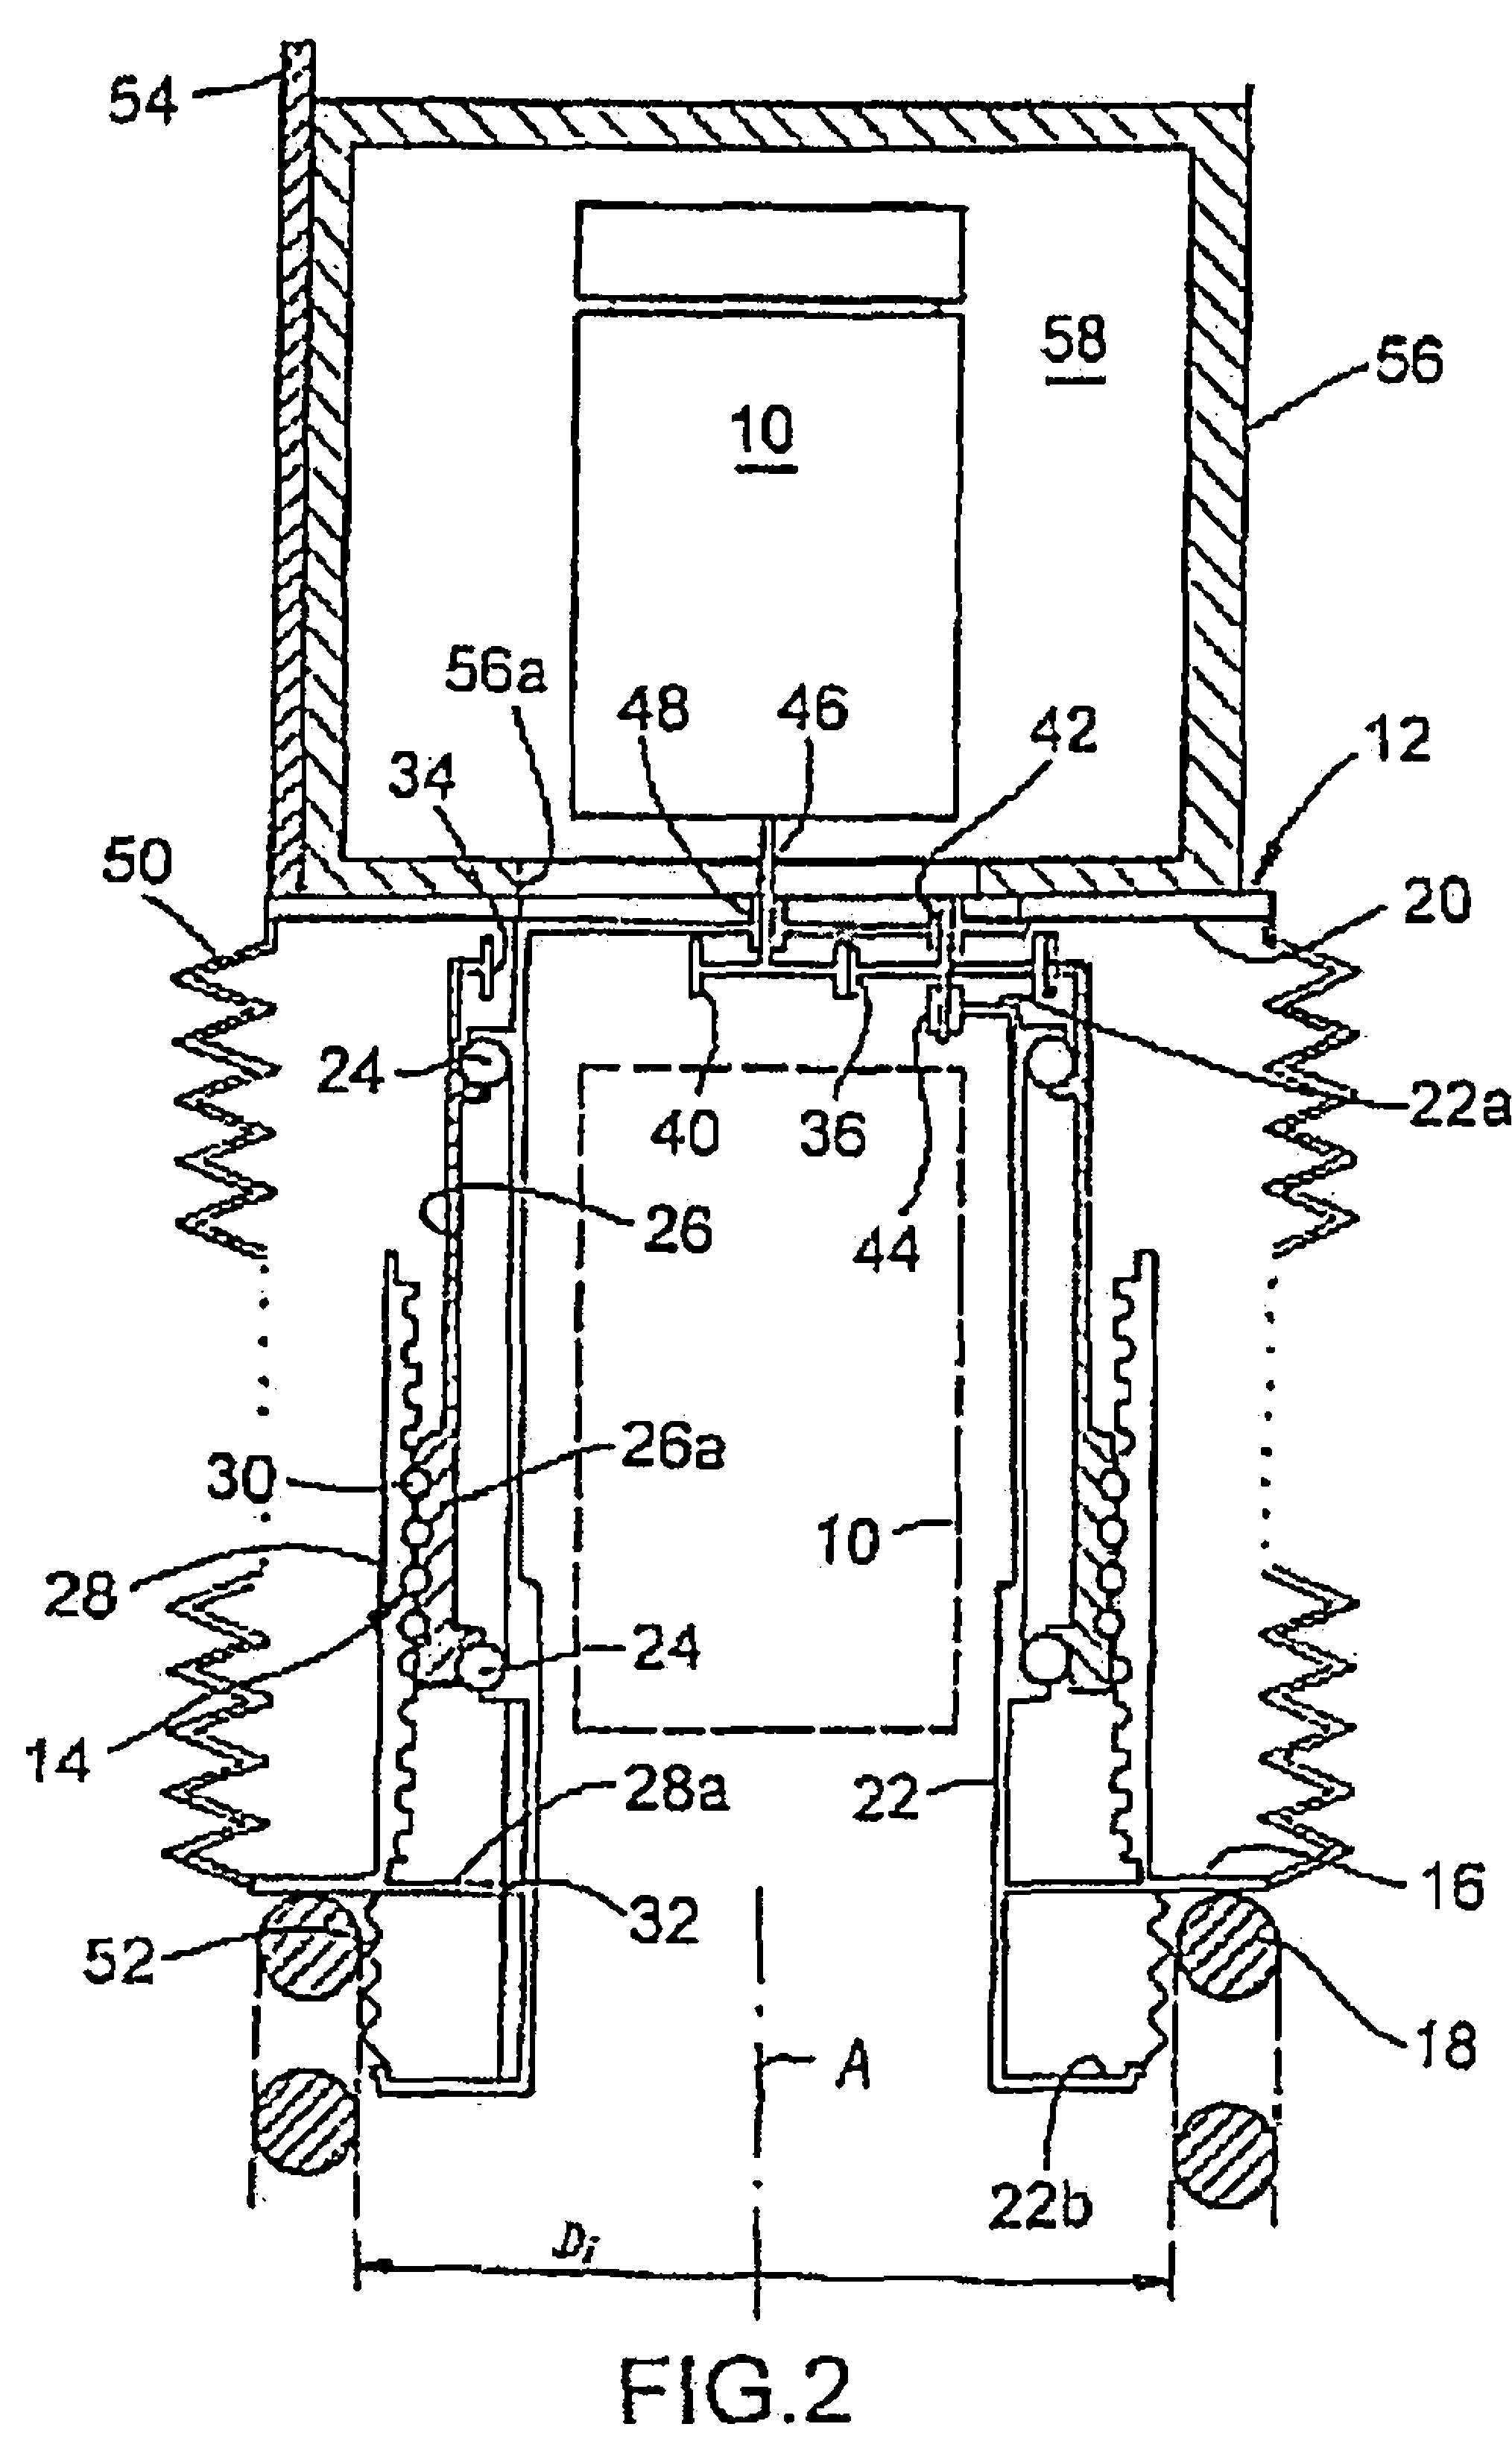 Height adjustment device for motor vehicles